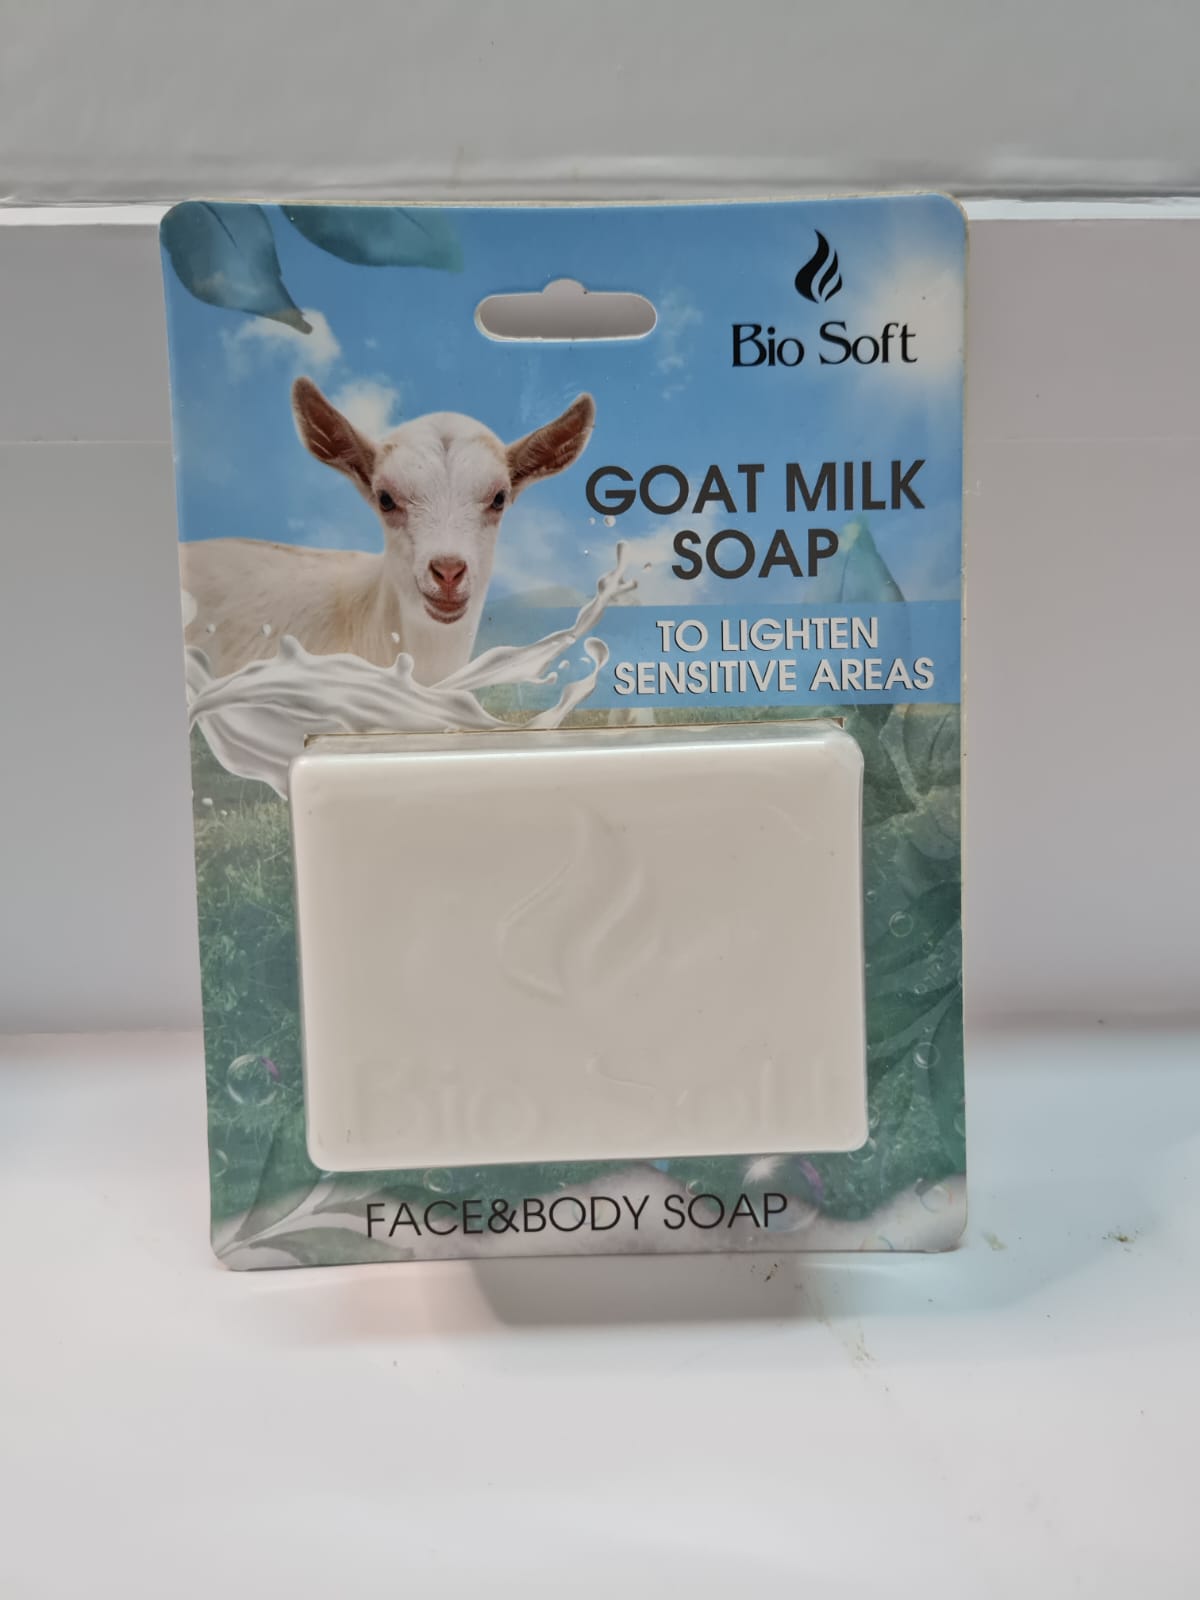 Soap with Goat milk